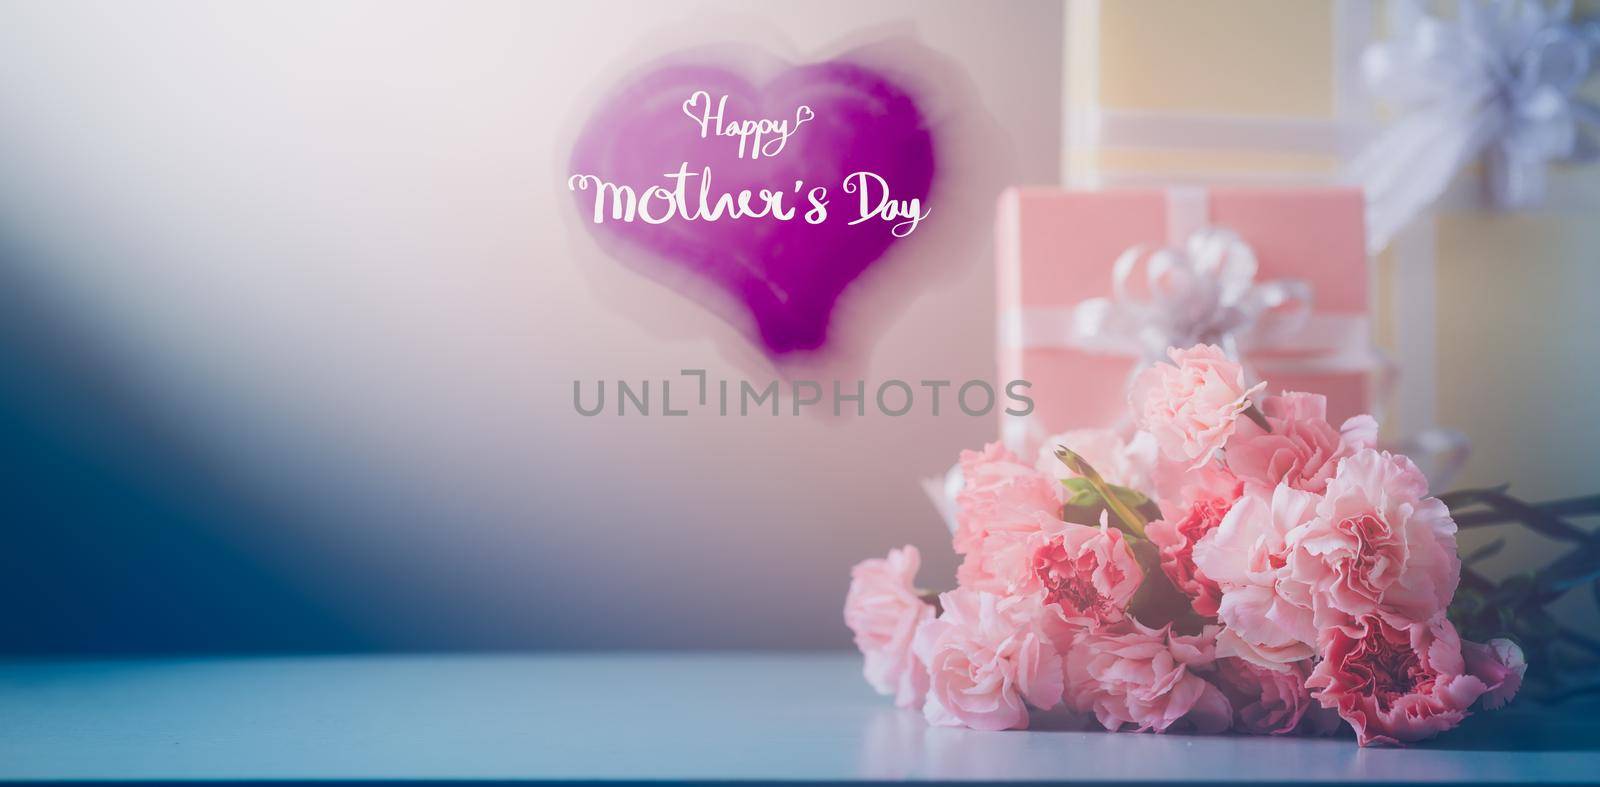 Still life with sweet carnation flowers, Message for Happy Mother's Day on a wooden heart